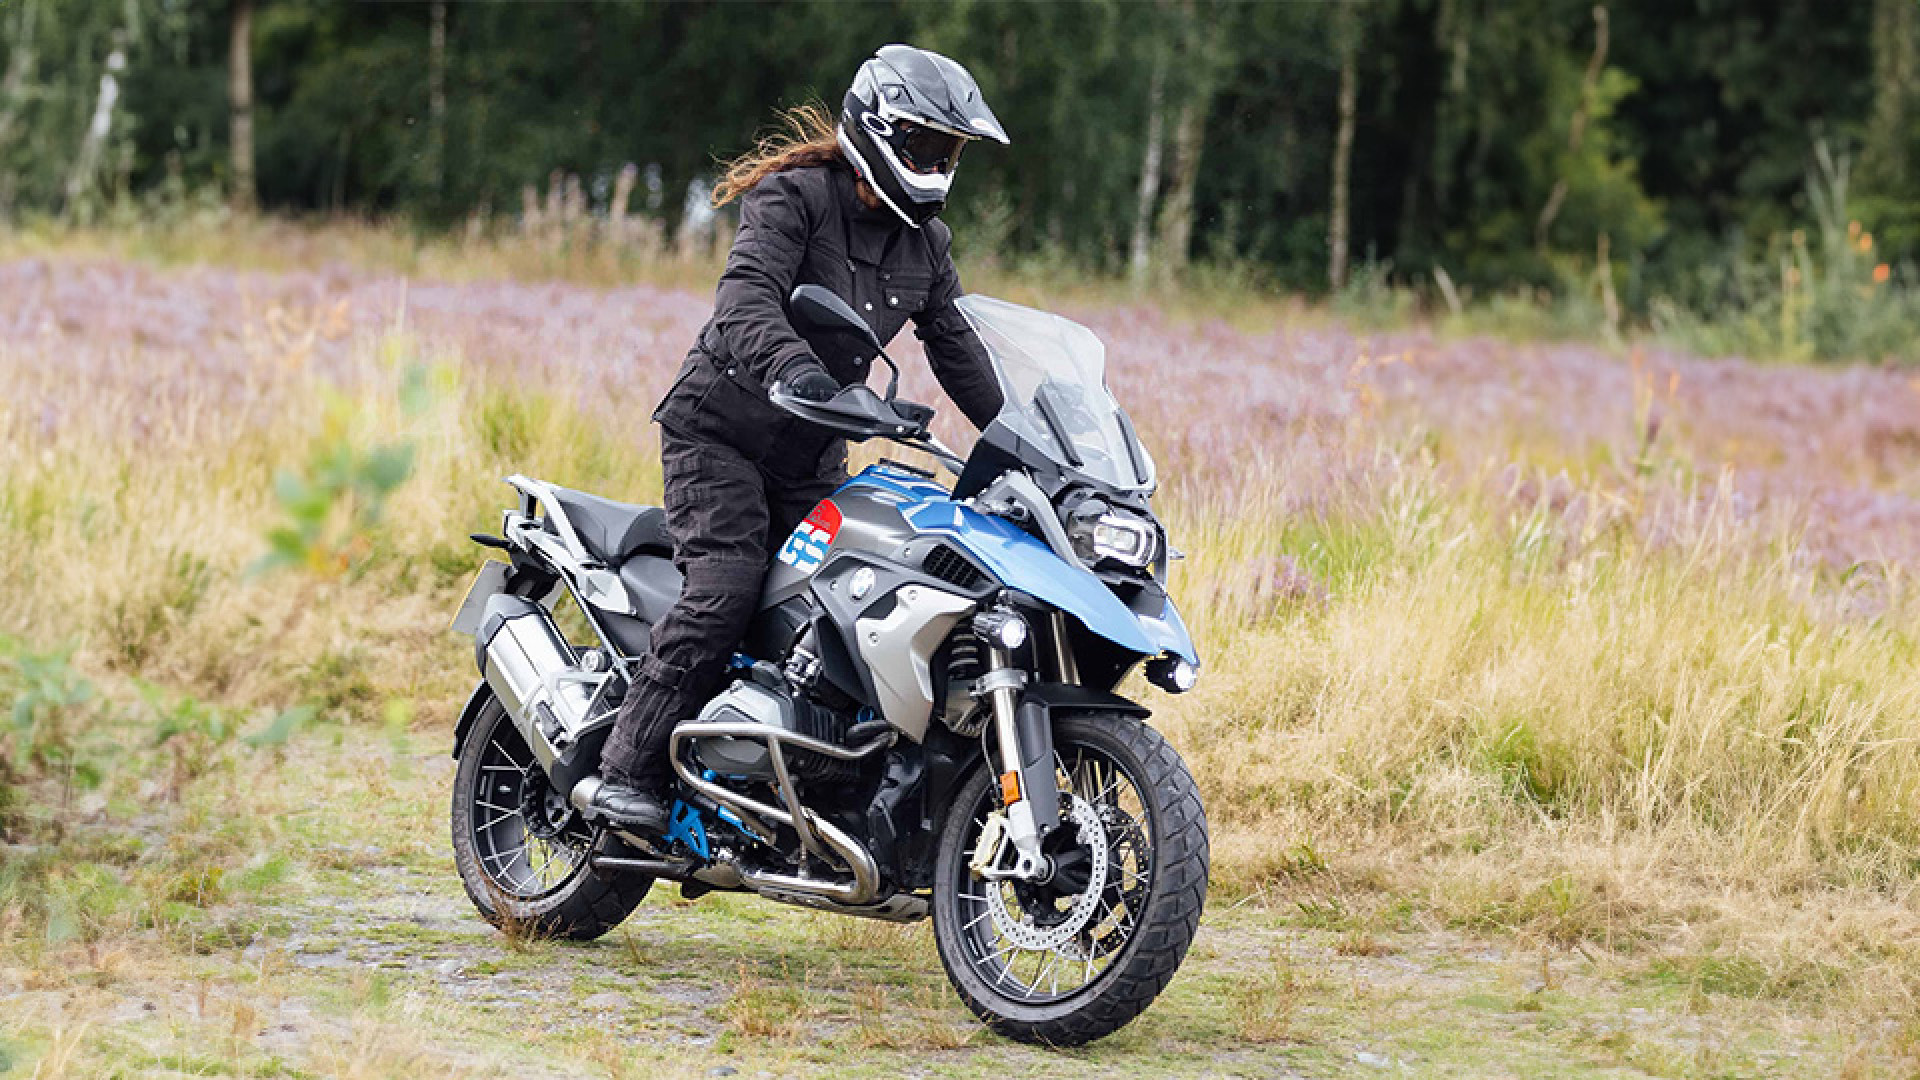 https://www.raceleathers.co.uk/image/cache/catalog/Blog%20Images/Merlin%20Mahala%20Ladies%20Motorcycle%20Trousers%20Review-1920x1080.jpg